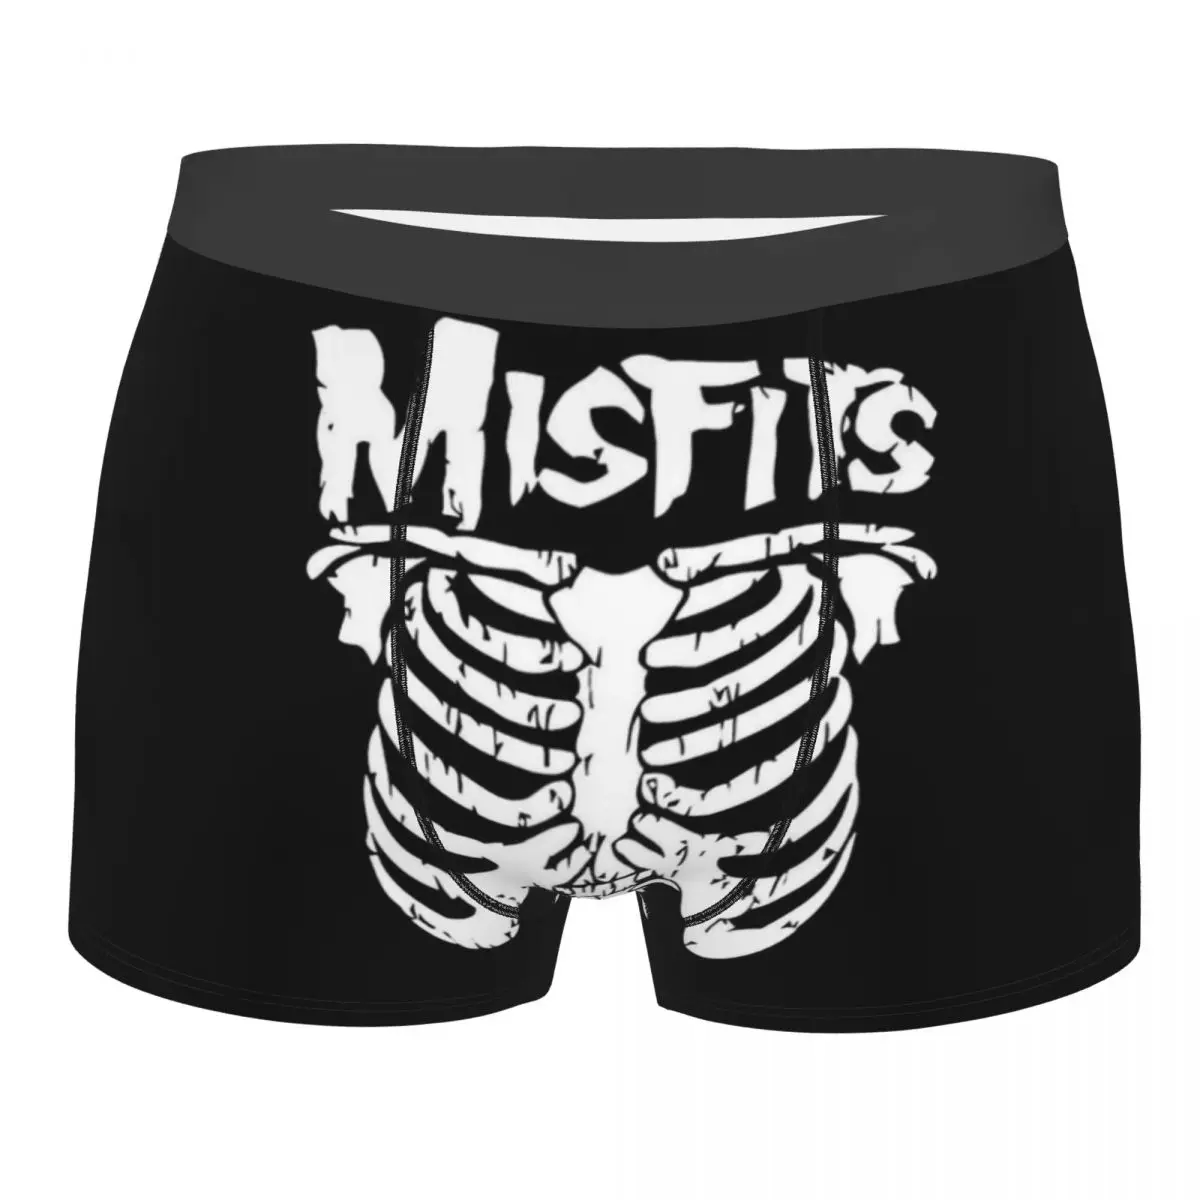 

Misfits Skull Men's Boxer Briefs special Highly Breathable Underpants High Quality 3D Print Shorts Gift Idea